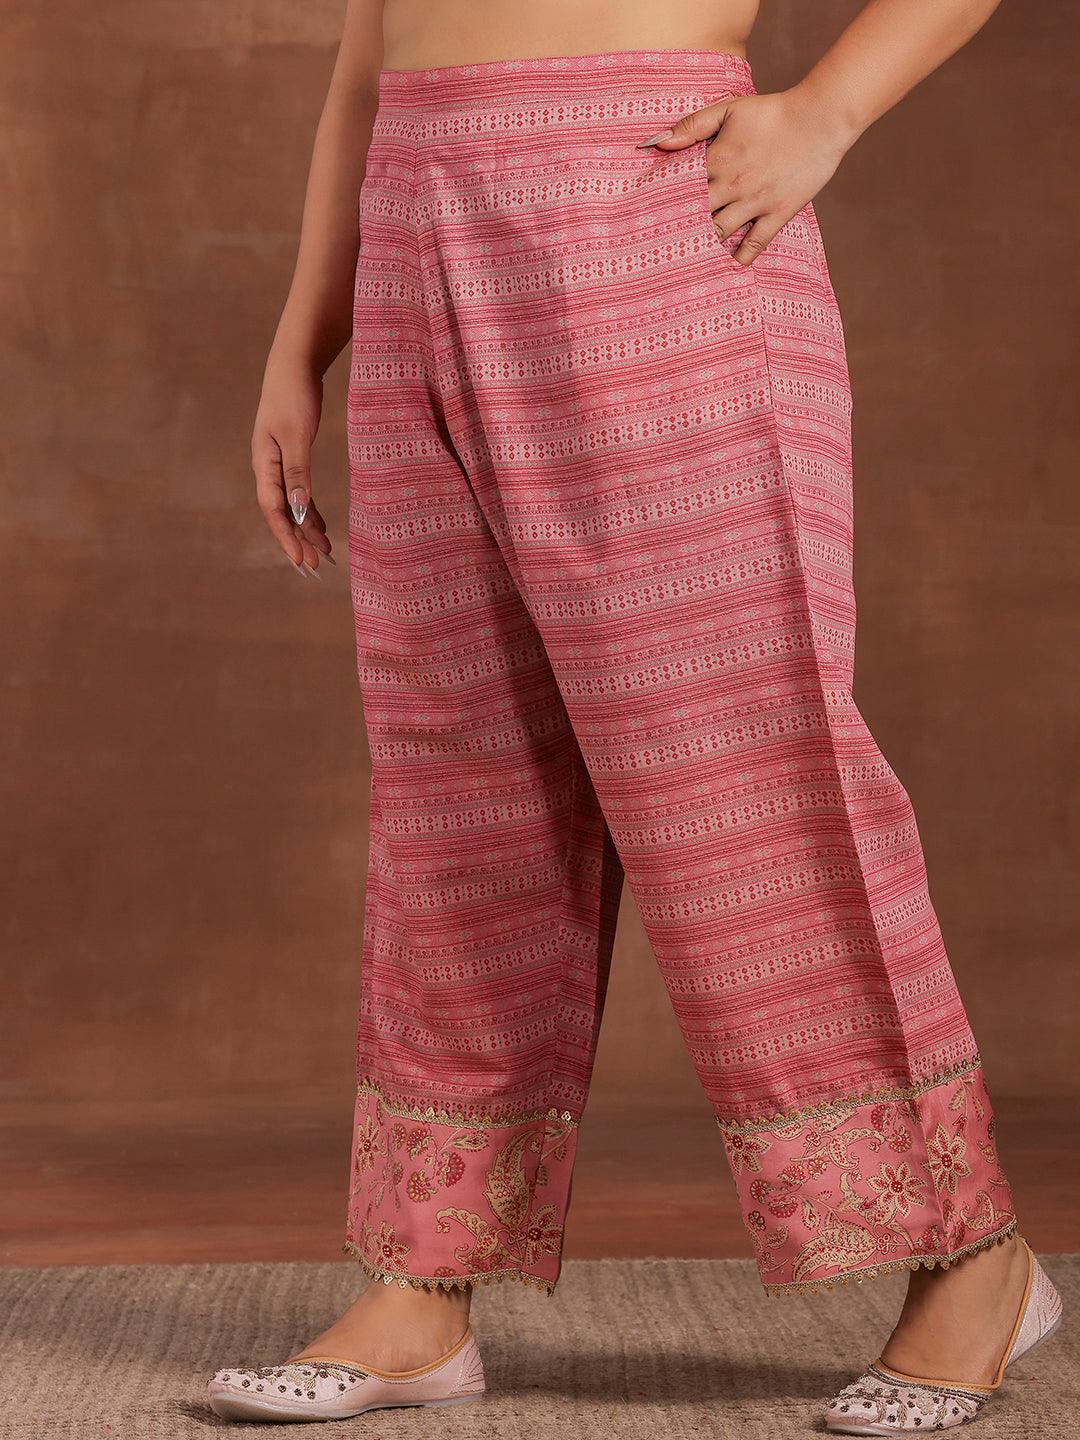 Plus Size Pink Printed Silk Blend Straight Suit With Dupatta